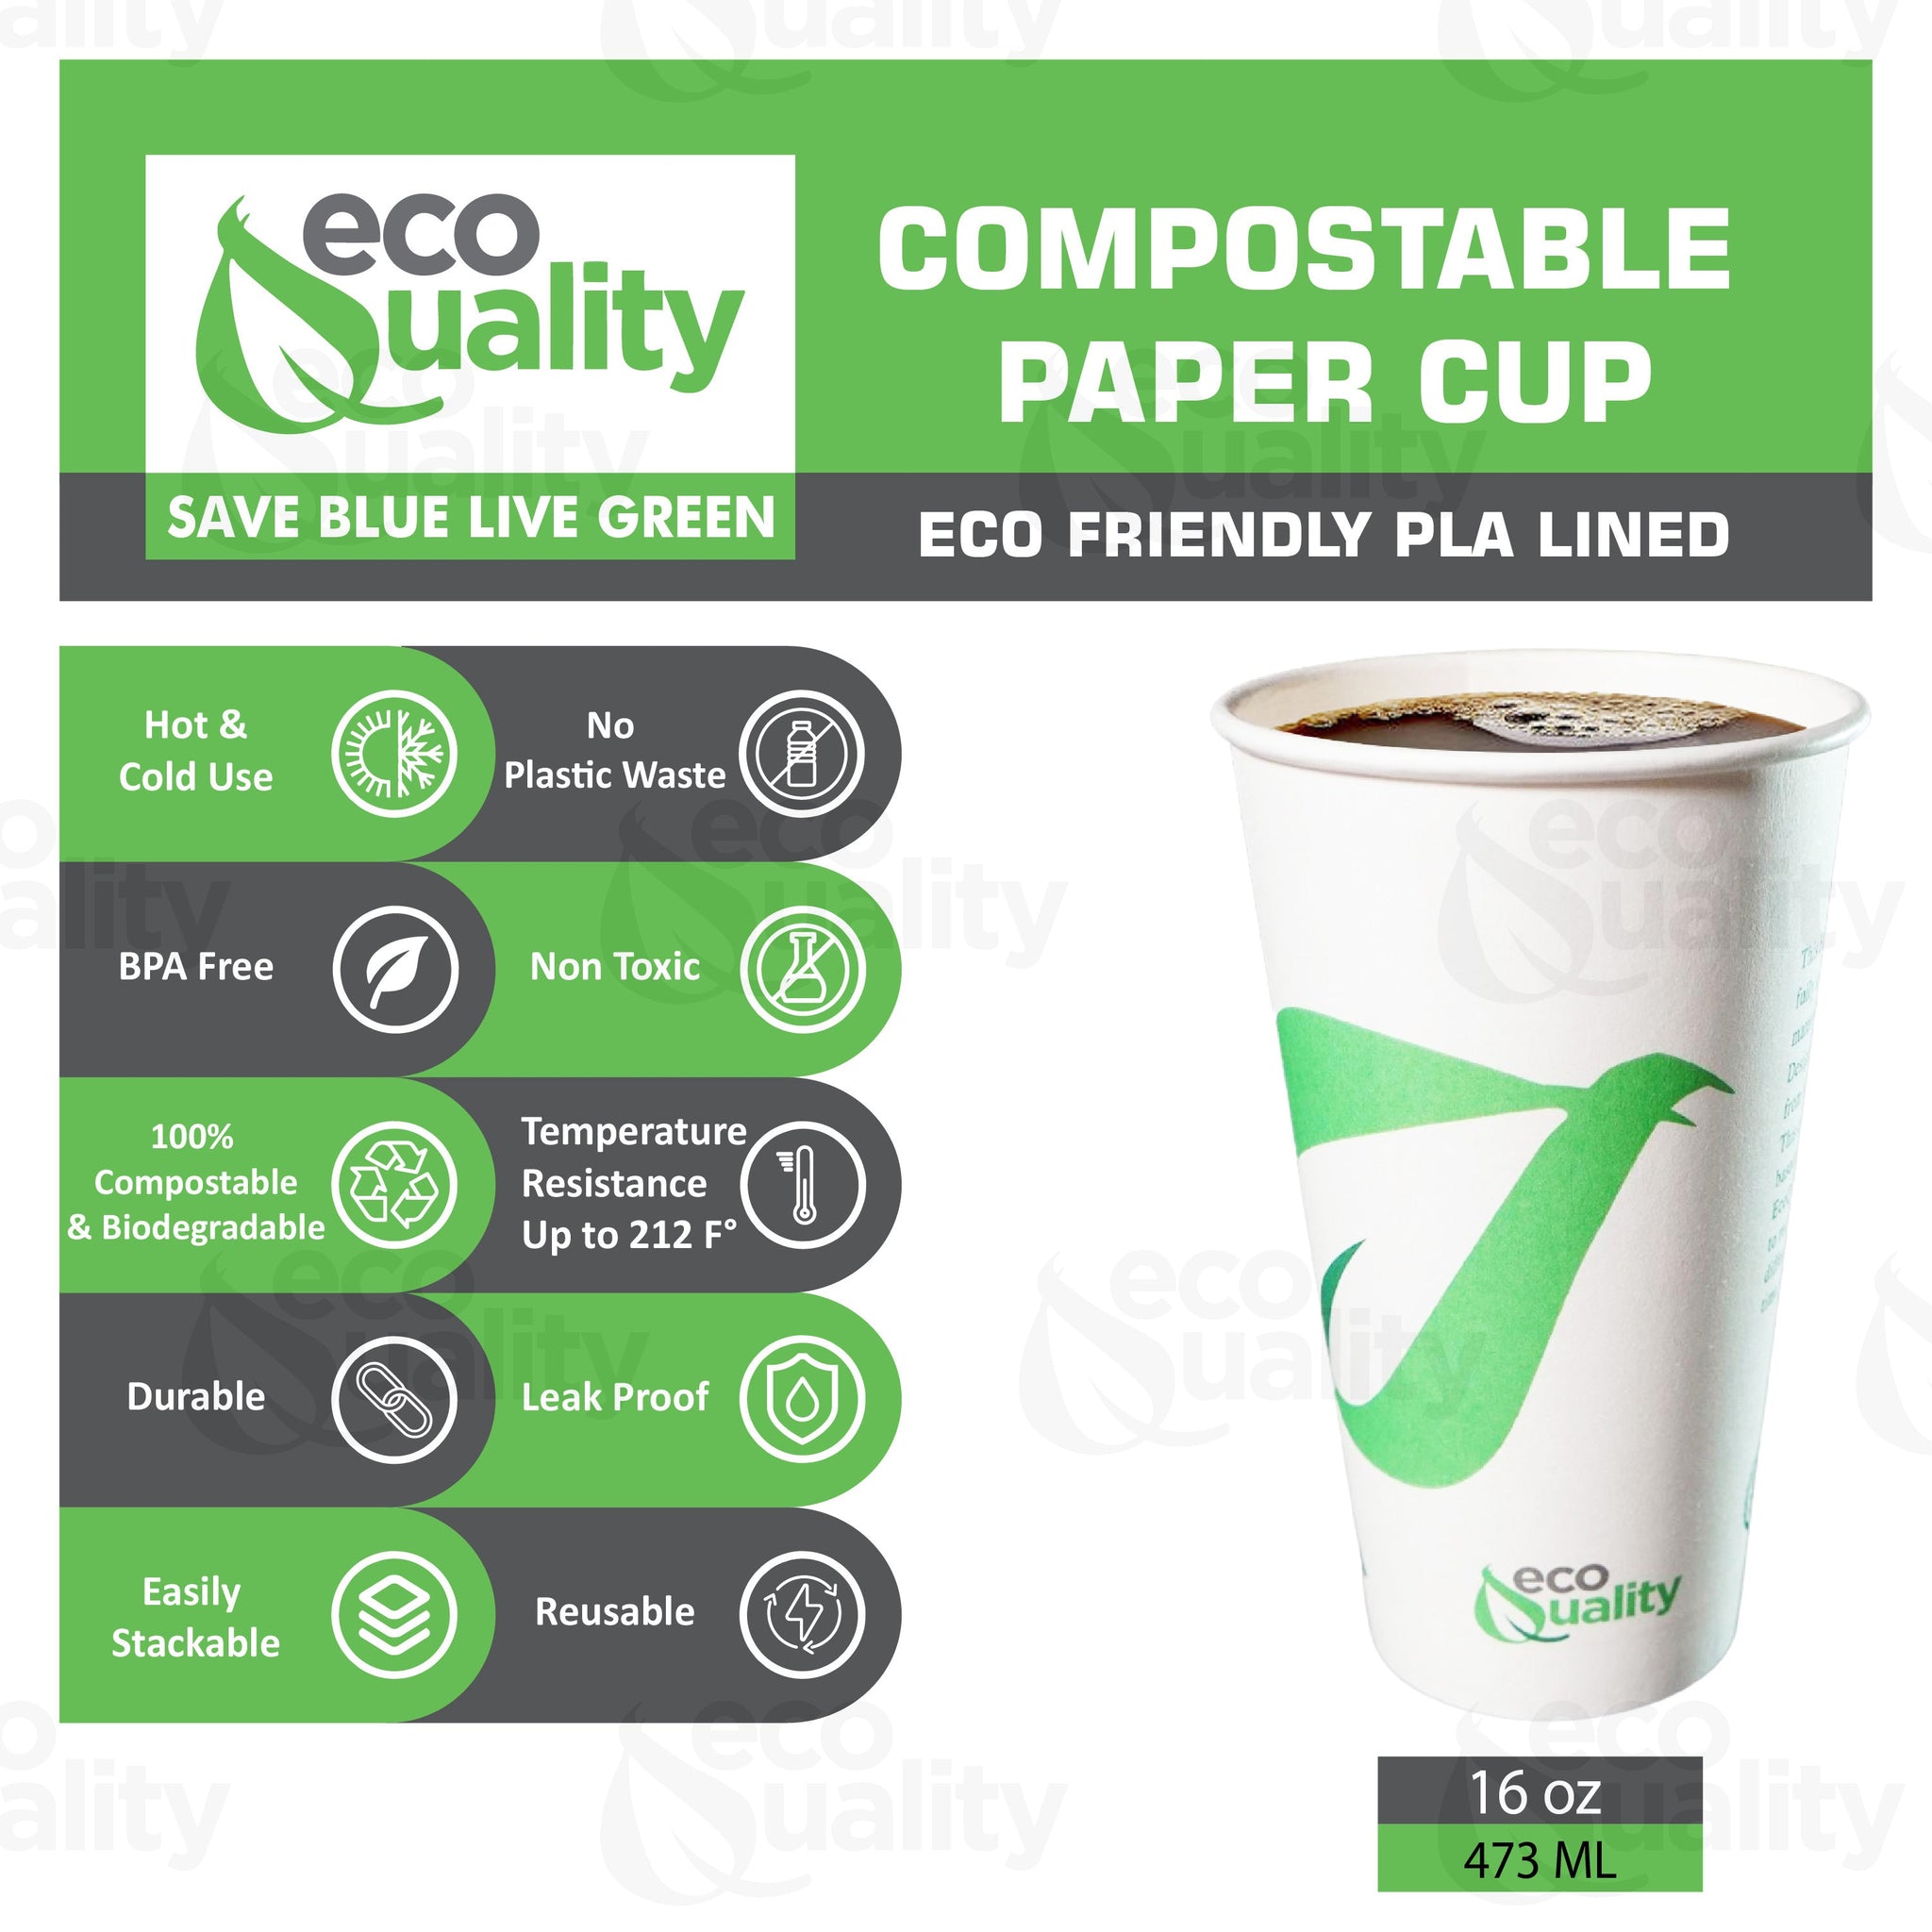 Disposable White Paper Coffee Cups Compostable Biodegradable